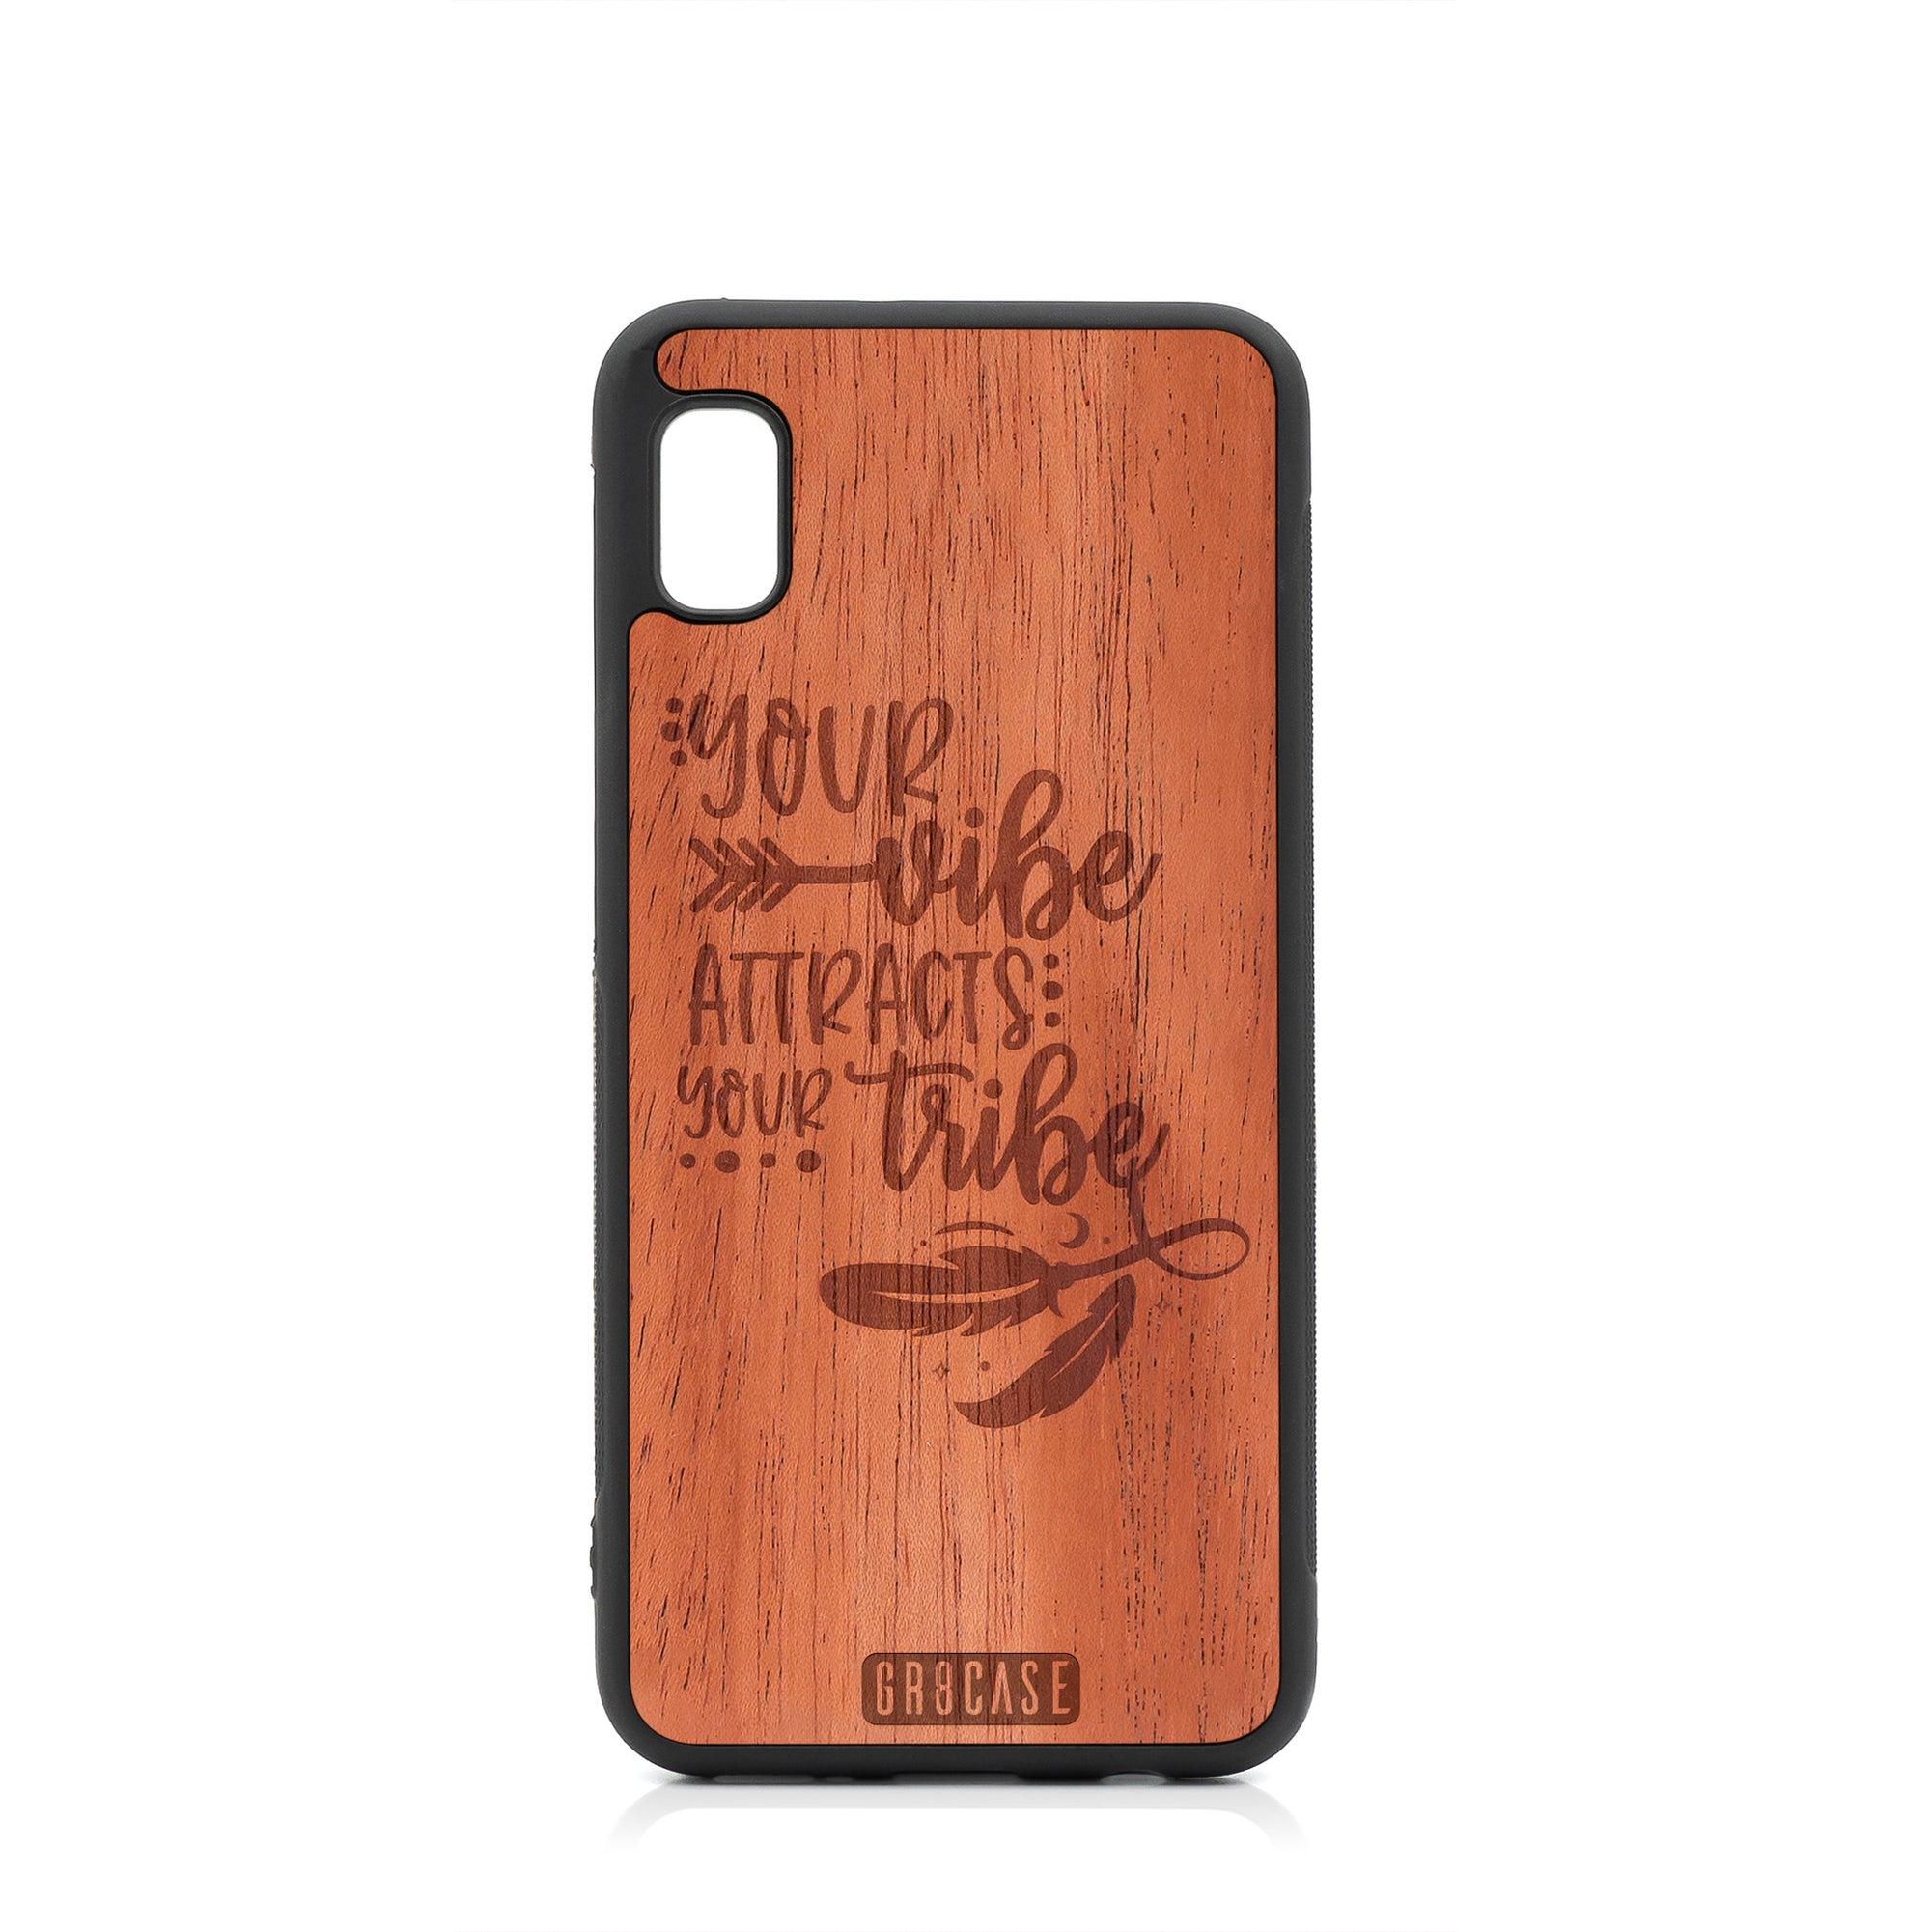 Your Vibe Attracts Your Tribe Design Wood Case For Samsung Galaxy A10E